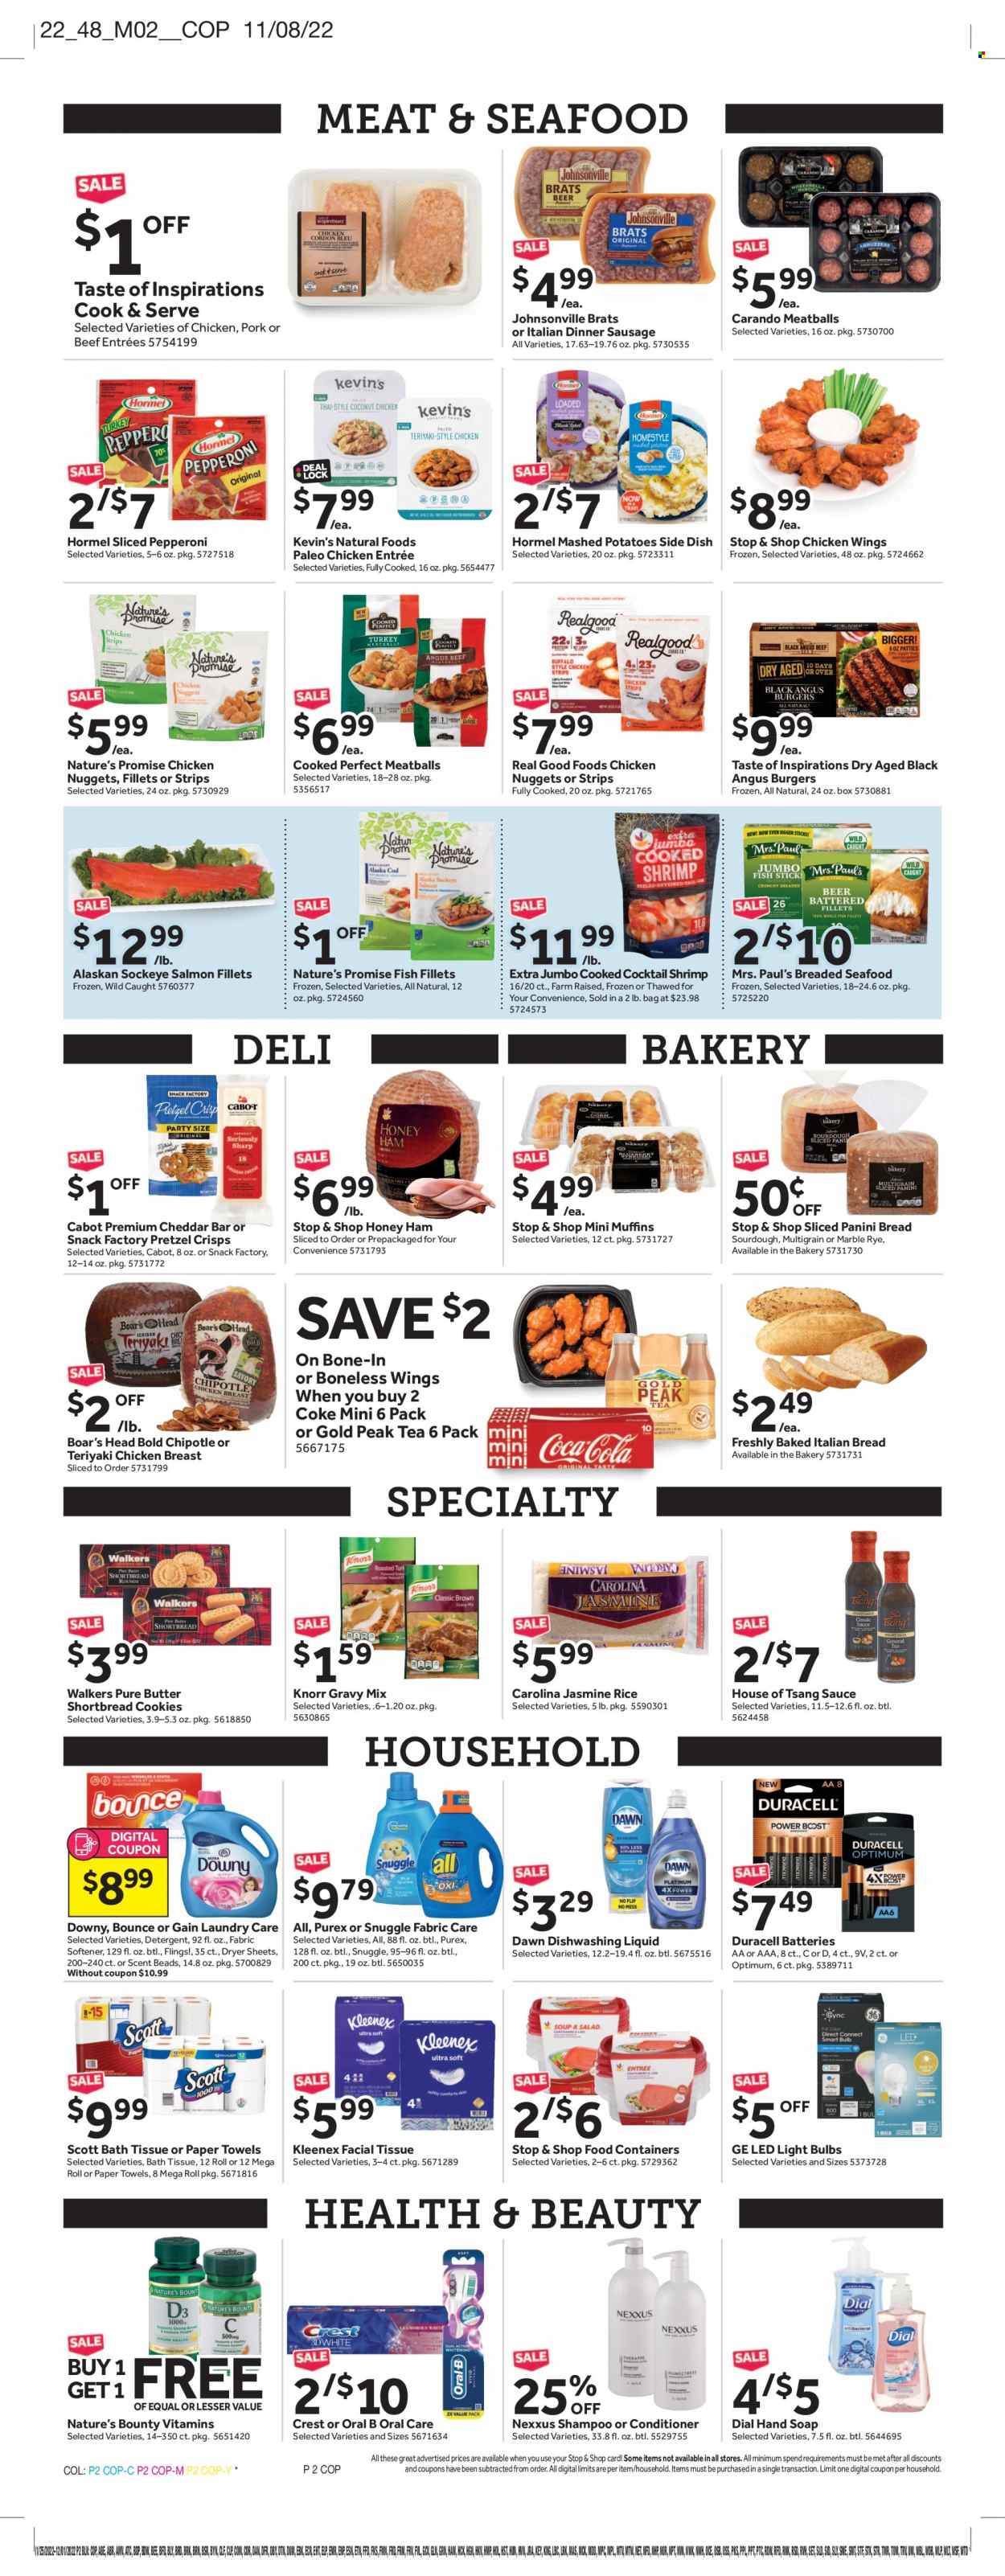 thumbnail - Stop & Shop Flyer - 11/25/2022 - 12/01/2022 - Sales products - panini, Nature’s Promise, muffin, chicken wings, beef meat, hamburger, Johnsonville, fish fillets, salmon, salmon fillet, seafood, fish, shrimps, mashed potatoes, meatballs, soup, nuggets, Knorr, sauce, chicken nuggets, Hormel, ham, sausage, pepperoni, cheddar, cheese, butter, strips, cookies, pretzel crisps, rice, jasmine rice, gravy mix, Coca-Cola, Gold Peak Tea, Boost, tea, beer, bath tissue, Kleenex, Scott, kitchen towels, paper towels, detergent, Gain, Snuggle, fabric softener, dryer sheets, Purex, dishwashing liquid, shampoo, hand soap, Dial, soap, Oral-B, Crest, conditioner, Nexxus, battery, bulb, Duracell, light bulb, Optimum, Nature's Bounty, vitamin D3. Page 2.